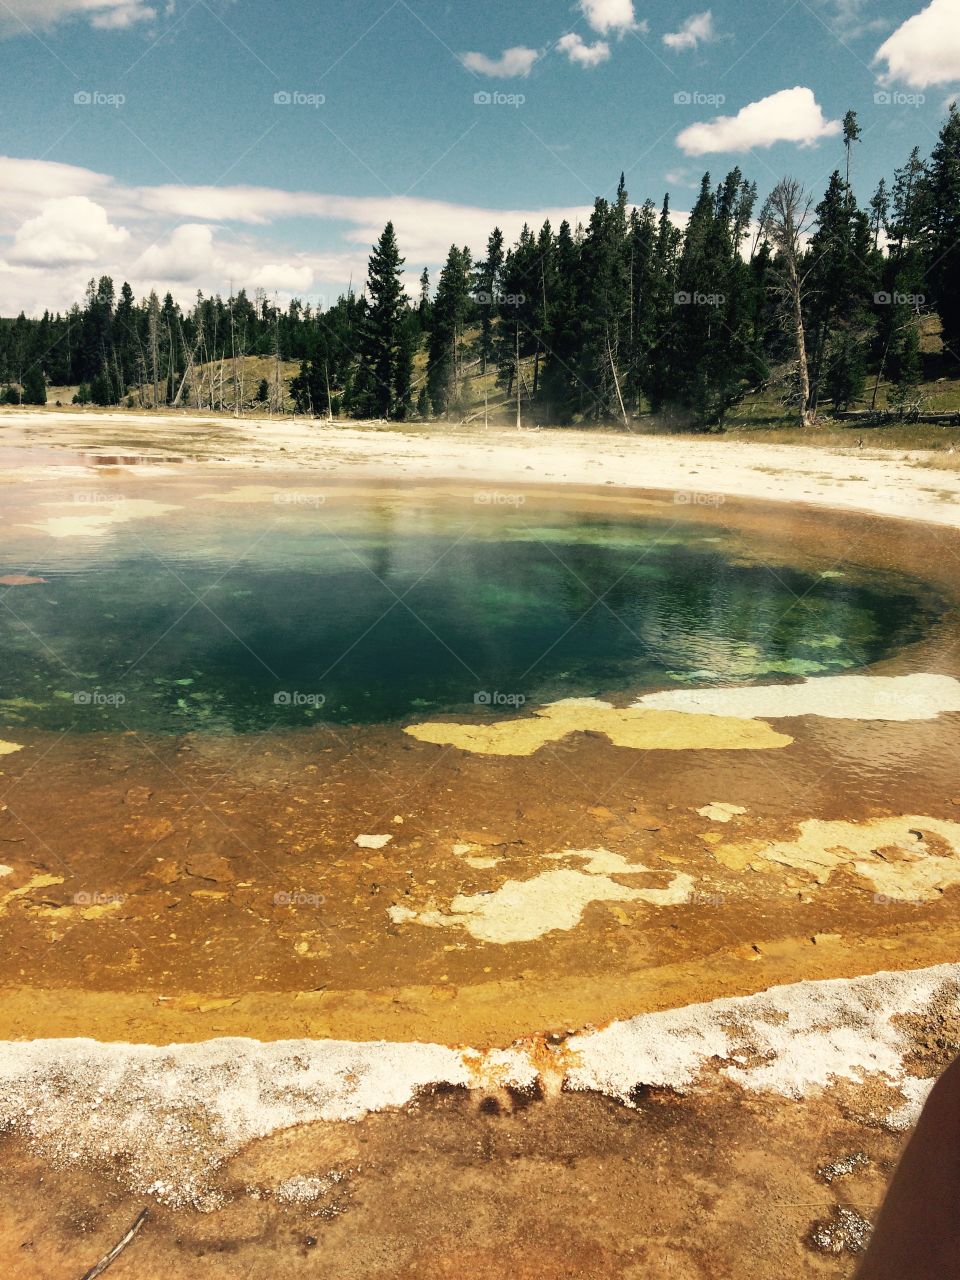 A geyser in Yellowstone National Park.